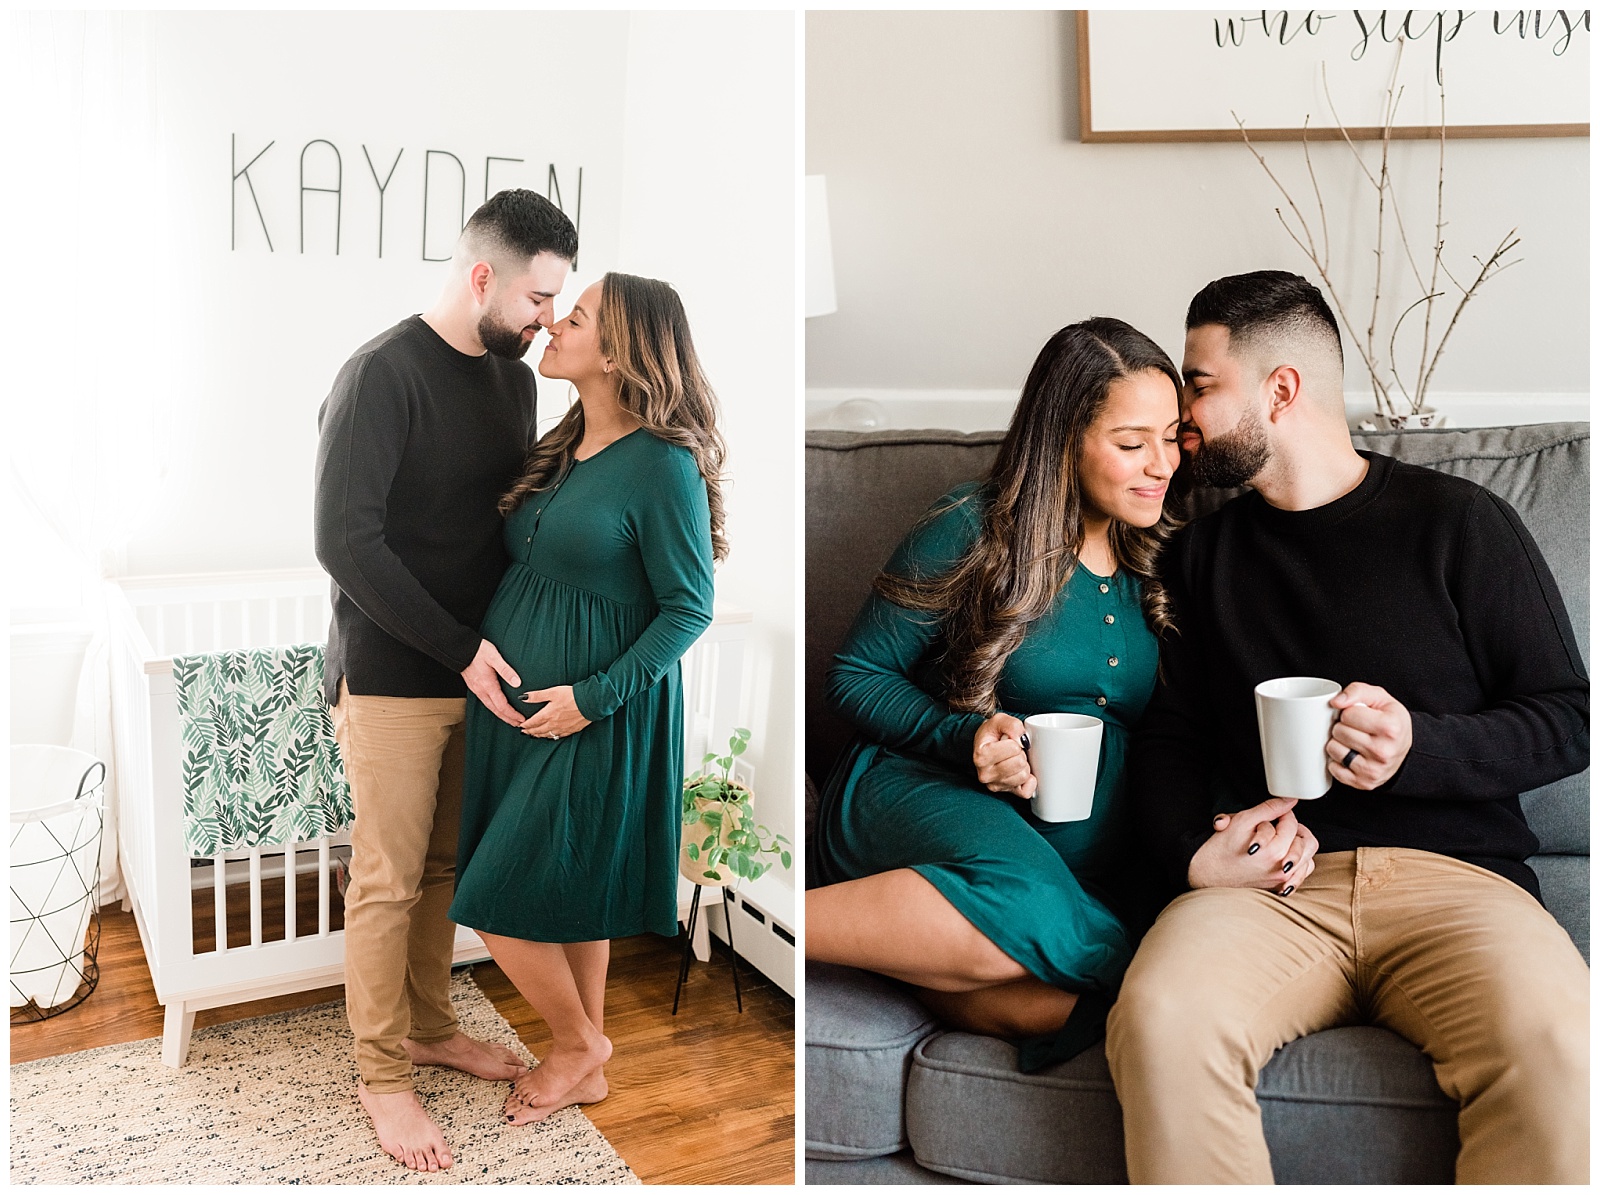 In Home Maternity Session, Nursery, Baby, New Parents, Maternity Shoot, Pregnant, Pregnancy Photos, New Jersey, Photographer, Baby Boy, Jungle Nursery, Photo, Coffee